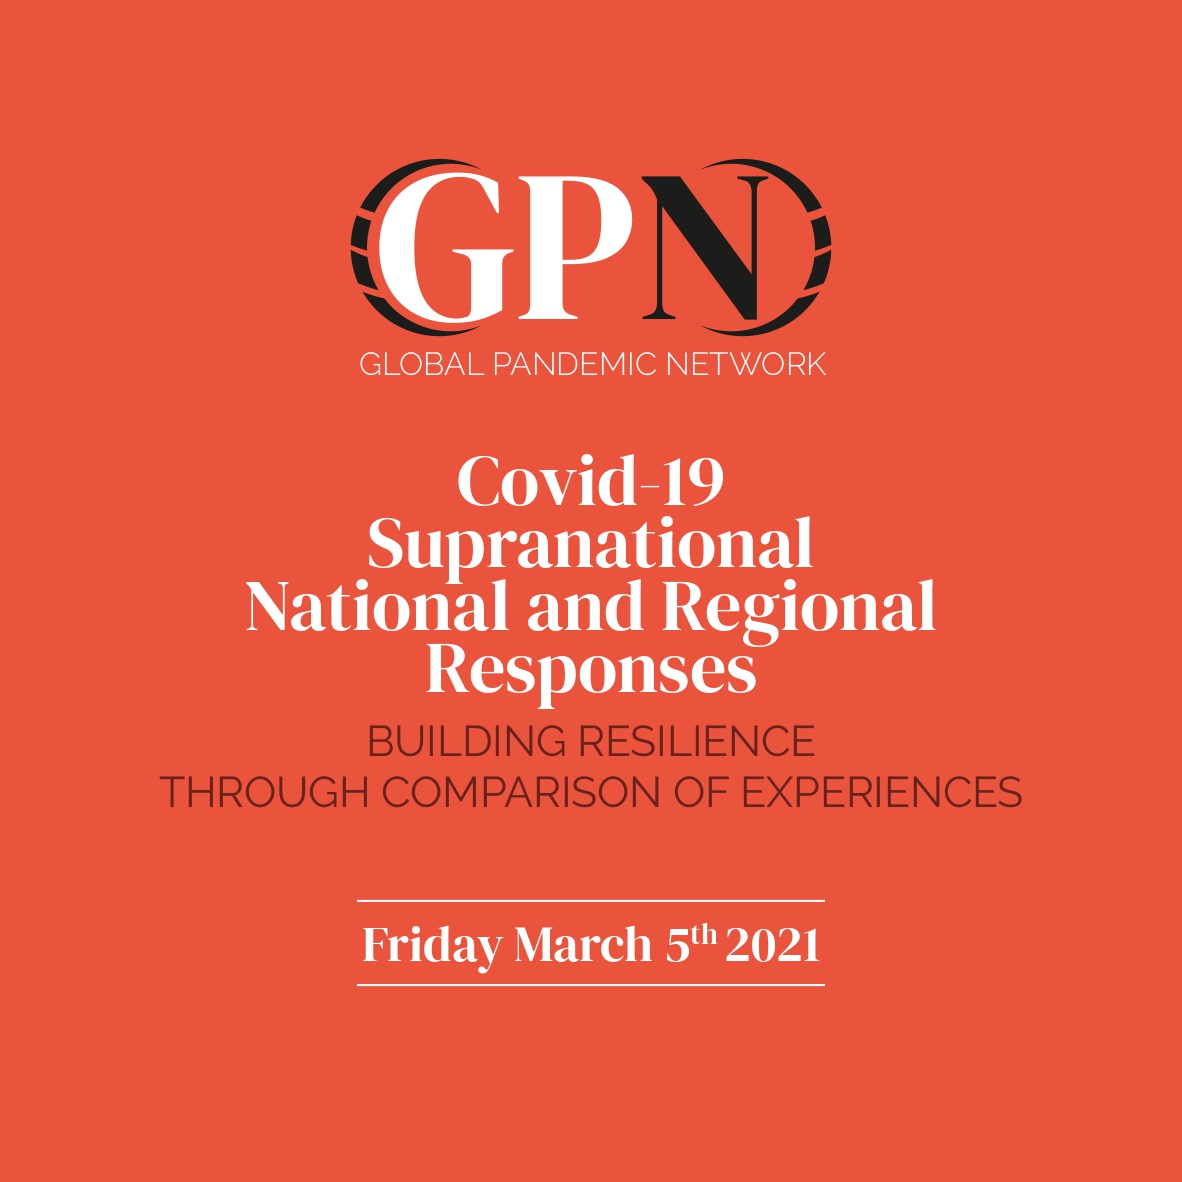 GPN Global Webinar "Covid-19 and supranational, national and regional responses. Building resilience on comparison of experiences"